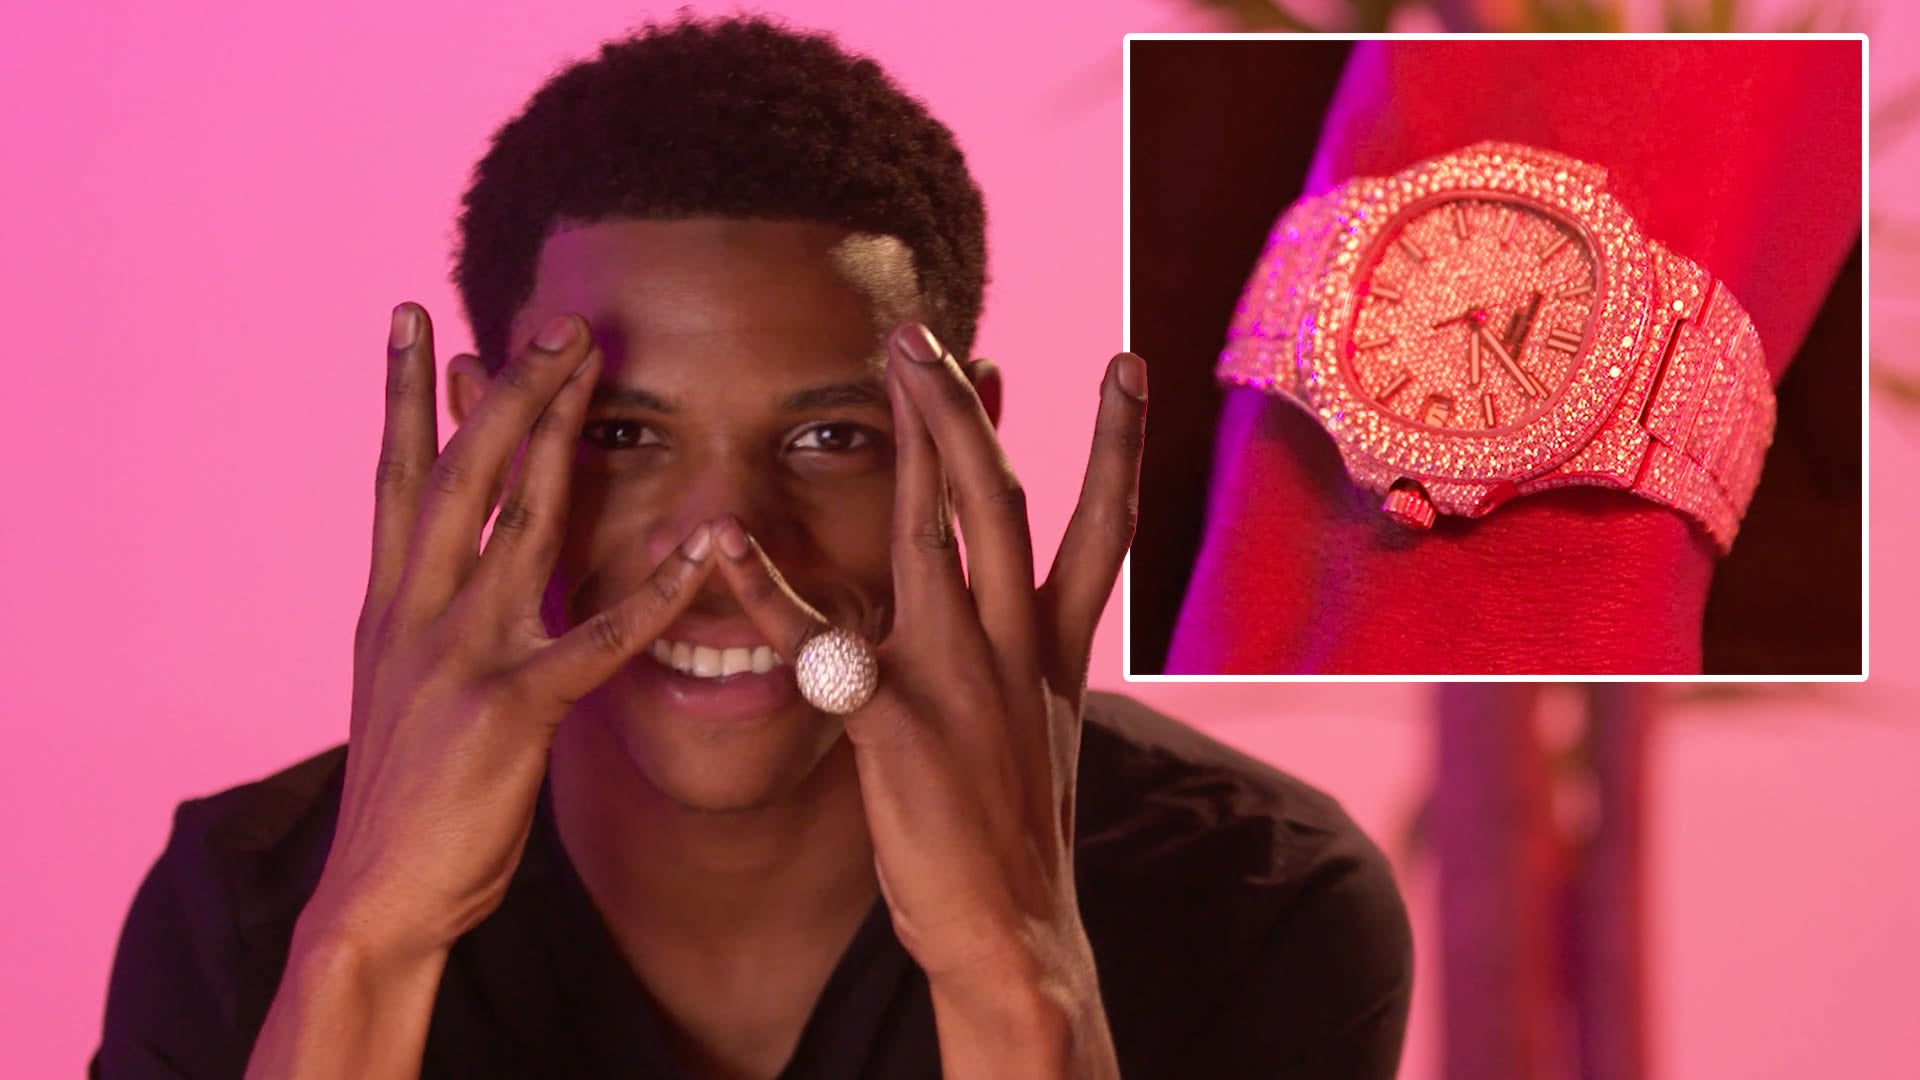 Myth Or Reality? A Boogie Wit Da Hoodie's Alleged Illuminati Connections